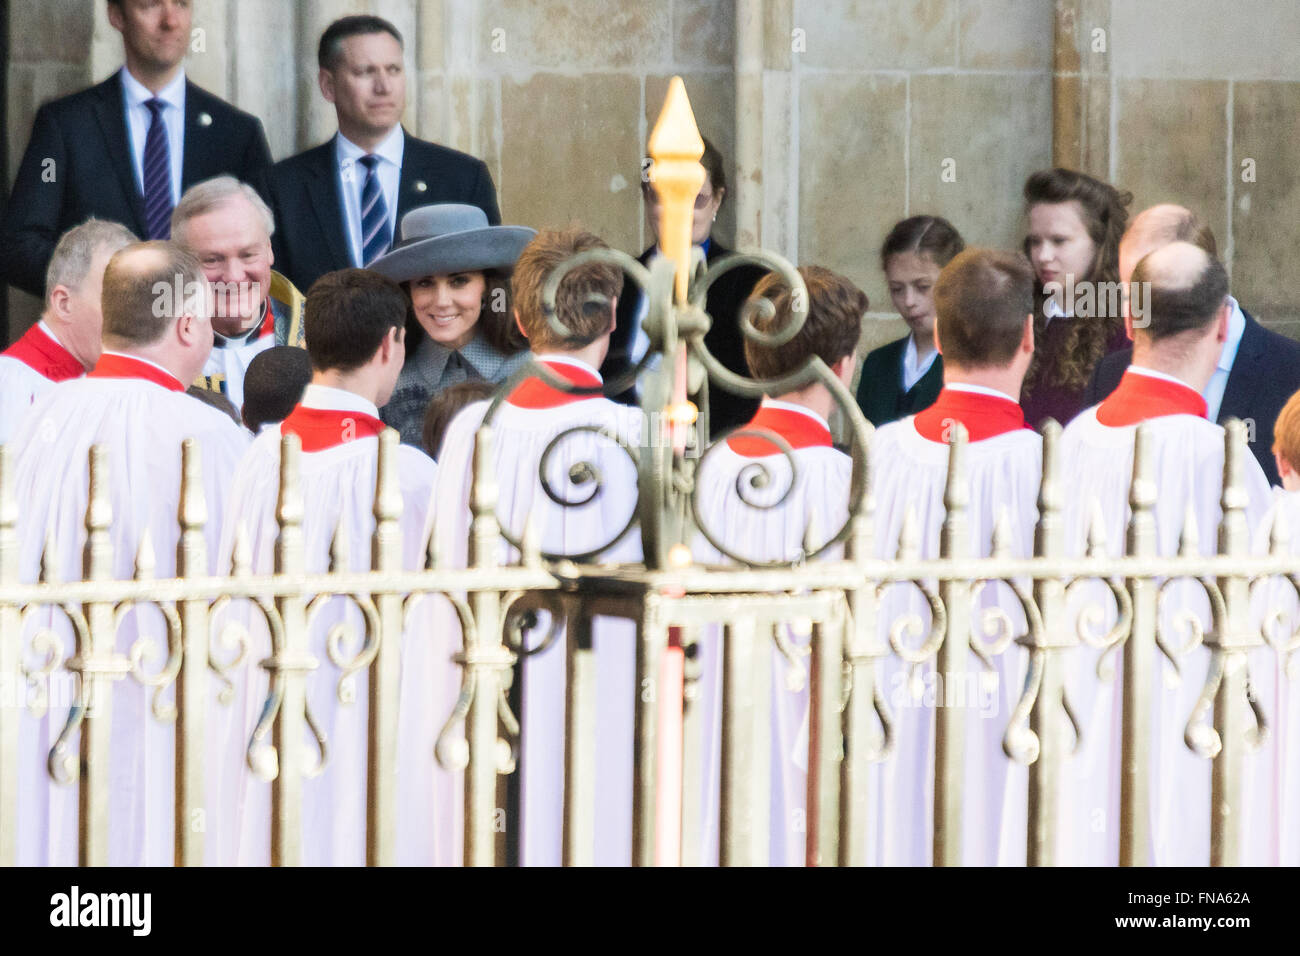 Westminster Abbey, London, March 14th 2016.  Her Majesty The Queen, Head of the Commonwealth, accompanied by The Duke of Edinburgh, The Duke and Duchess of Cambridge and Prince Harry attend the Commonwealth Service at Westminster Abbey on Commonwealth Day. PICTURED: The Duchess of Cambridge chats with members of the choir. Credit:  Paul Davey/Alamy Live News Stock Photo